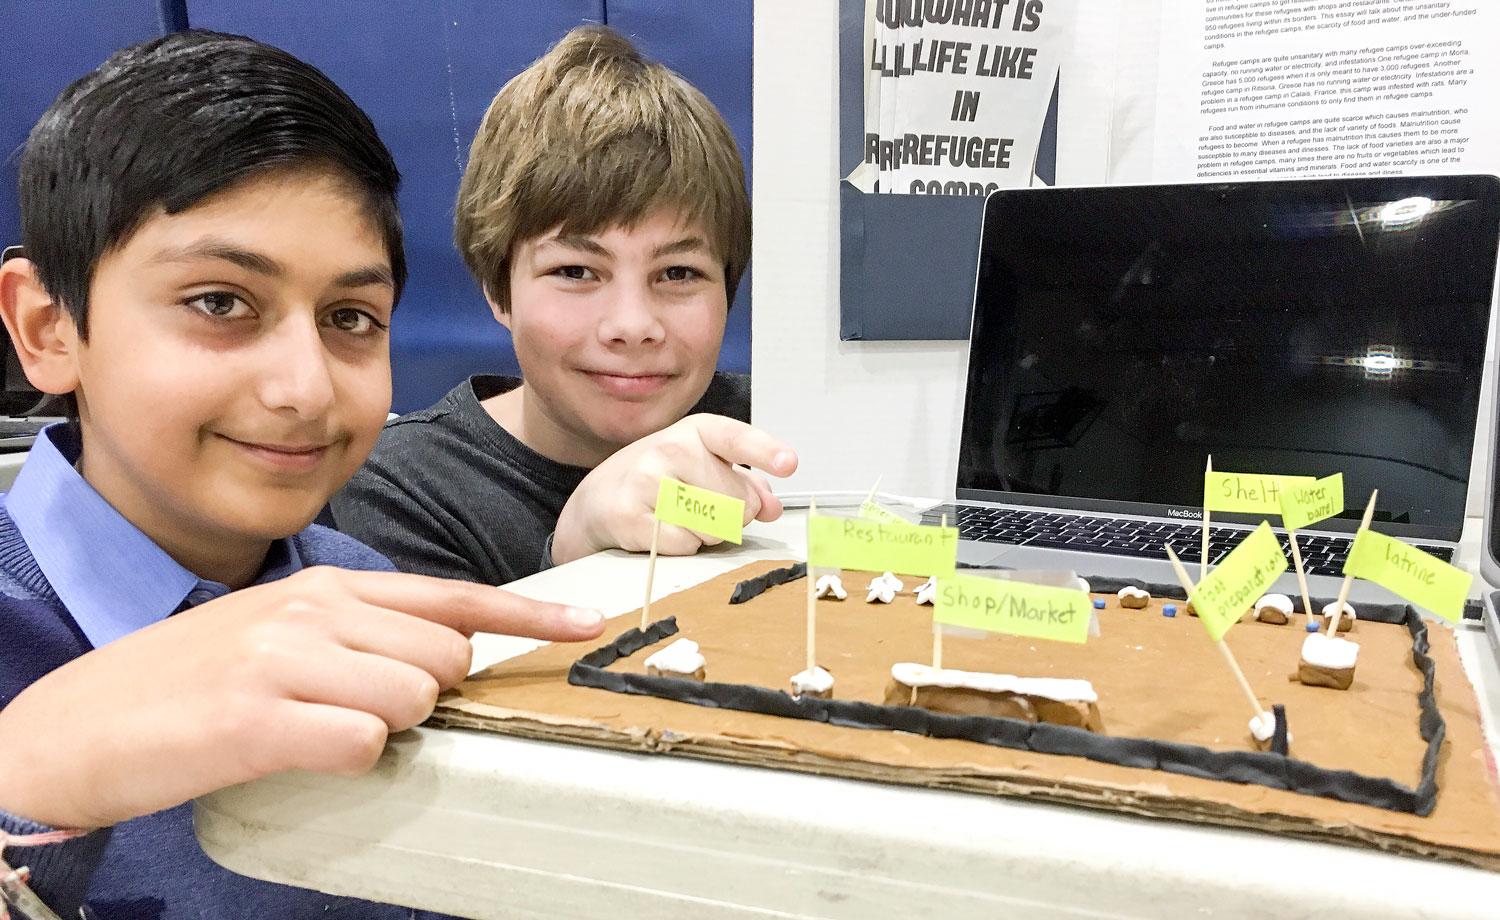 Tejan and William show off the details of the model they built.